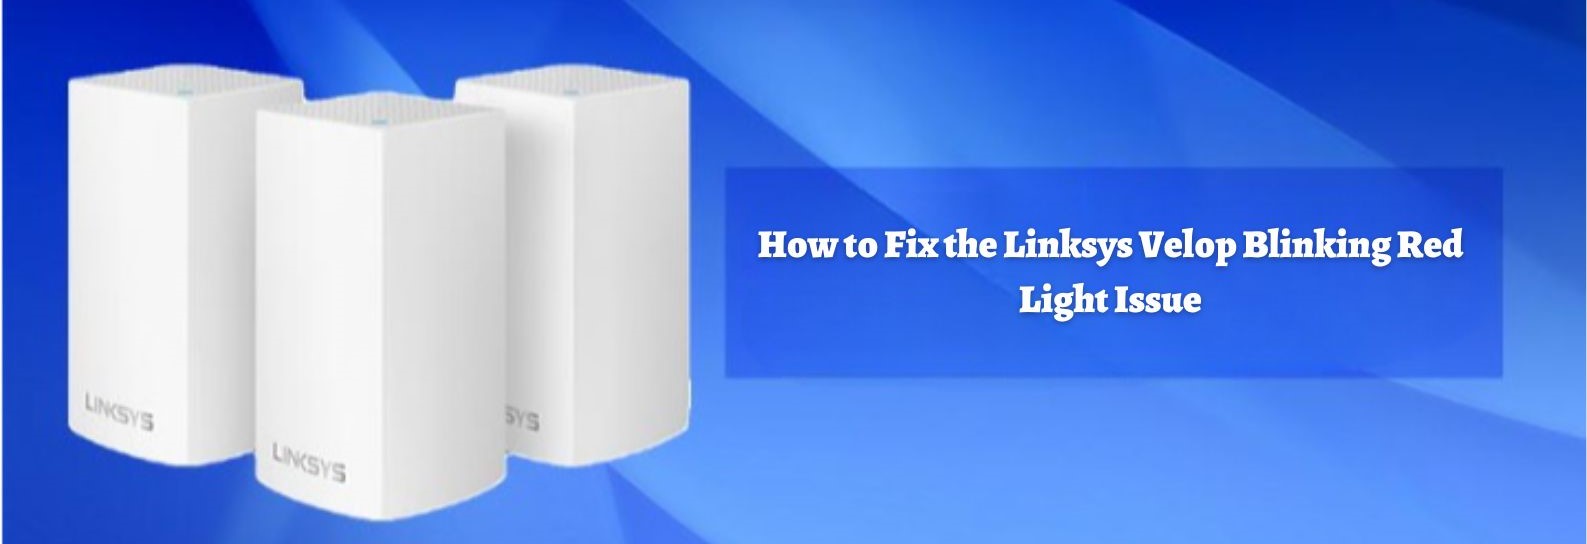 How to the Linksys Velop Blinking Red Light